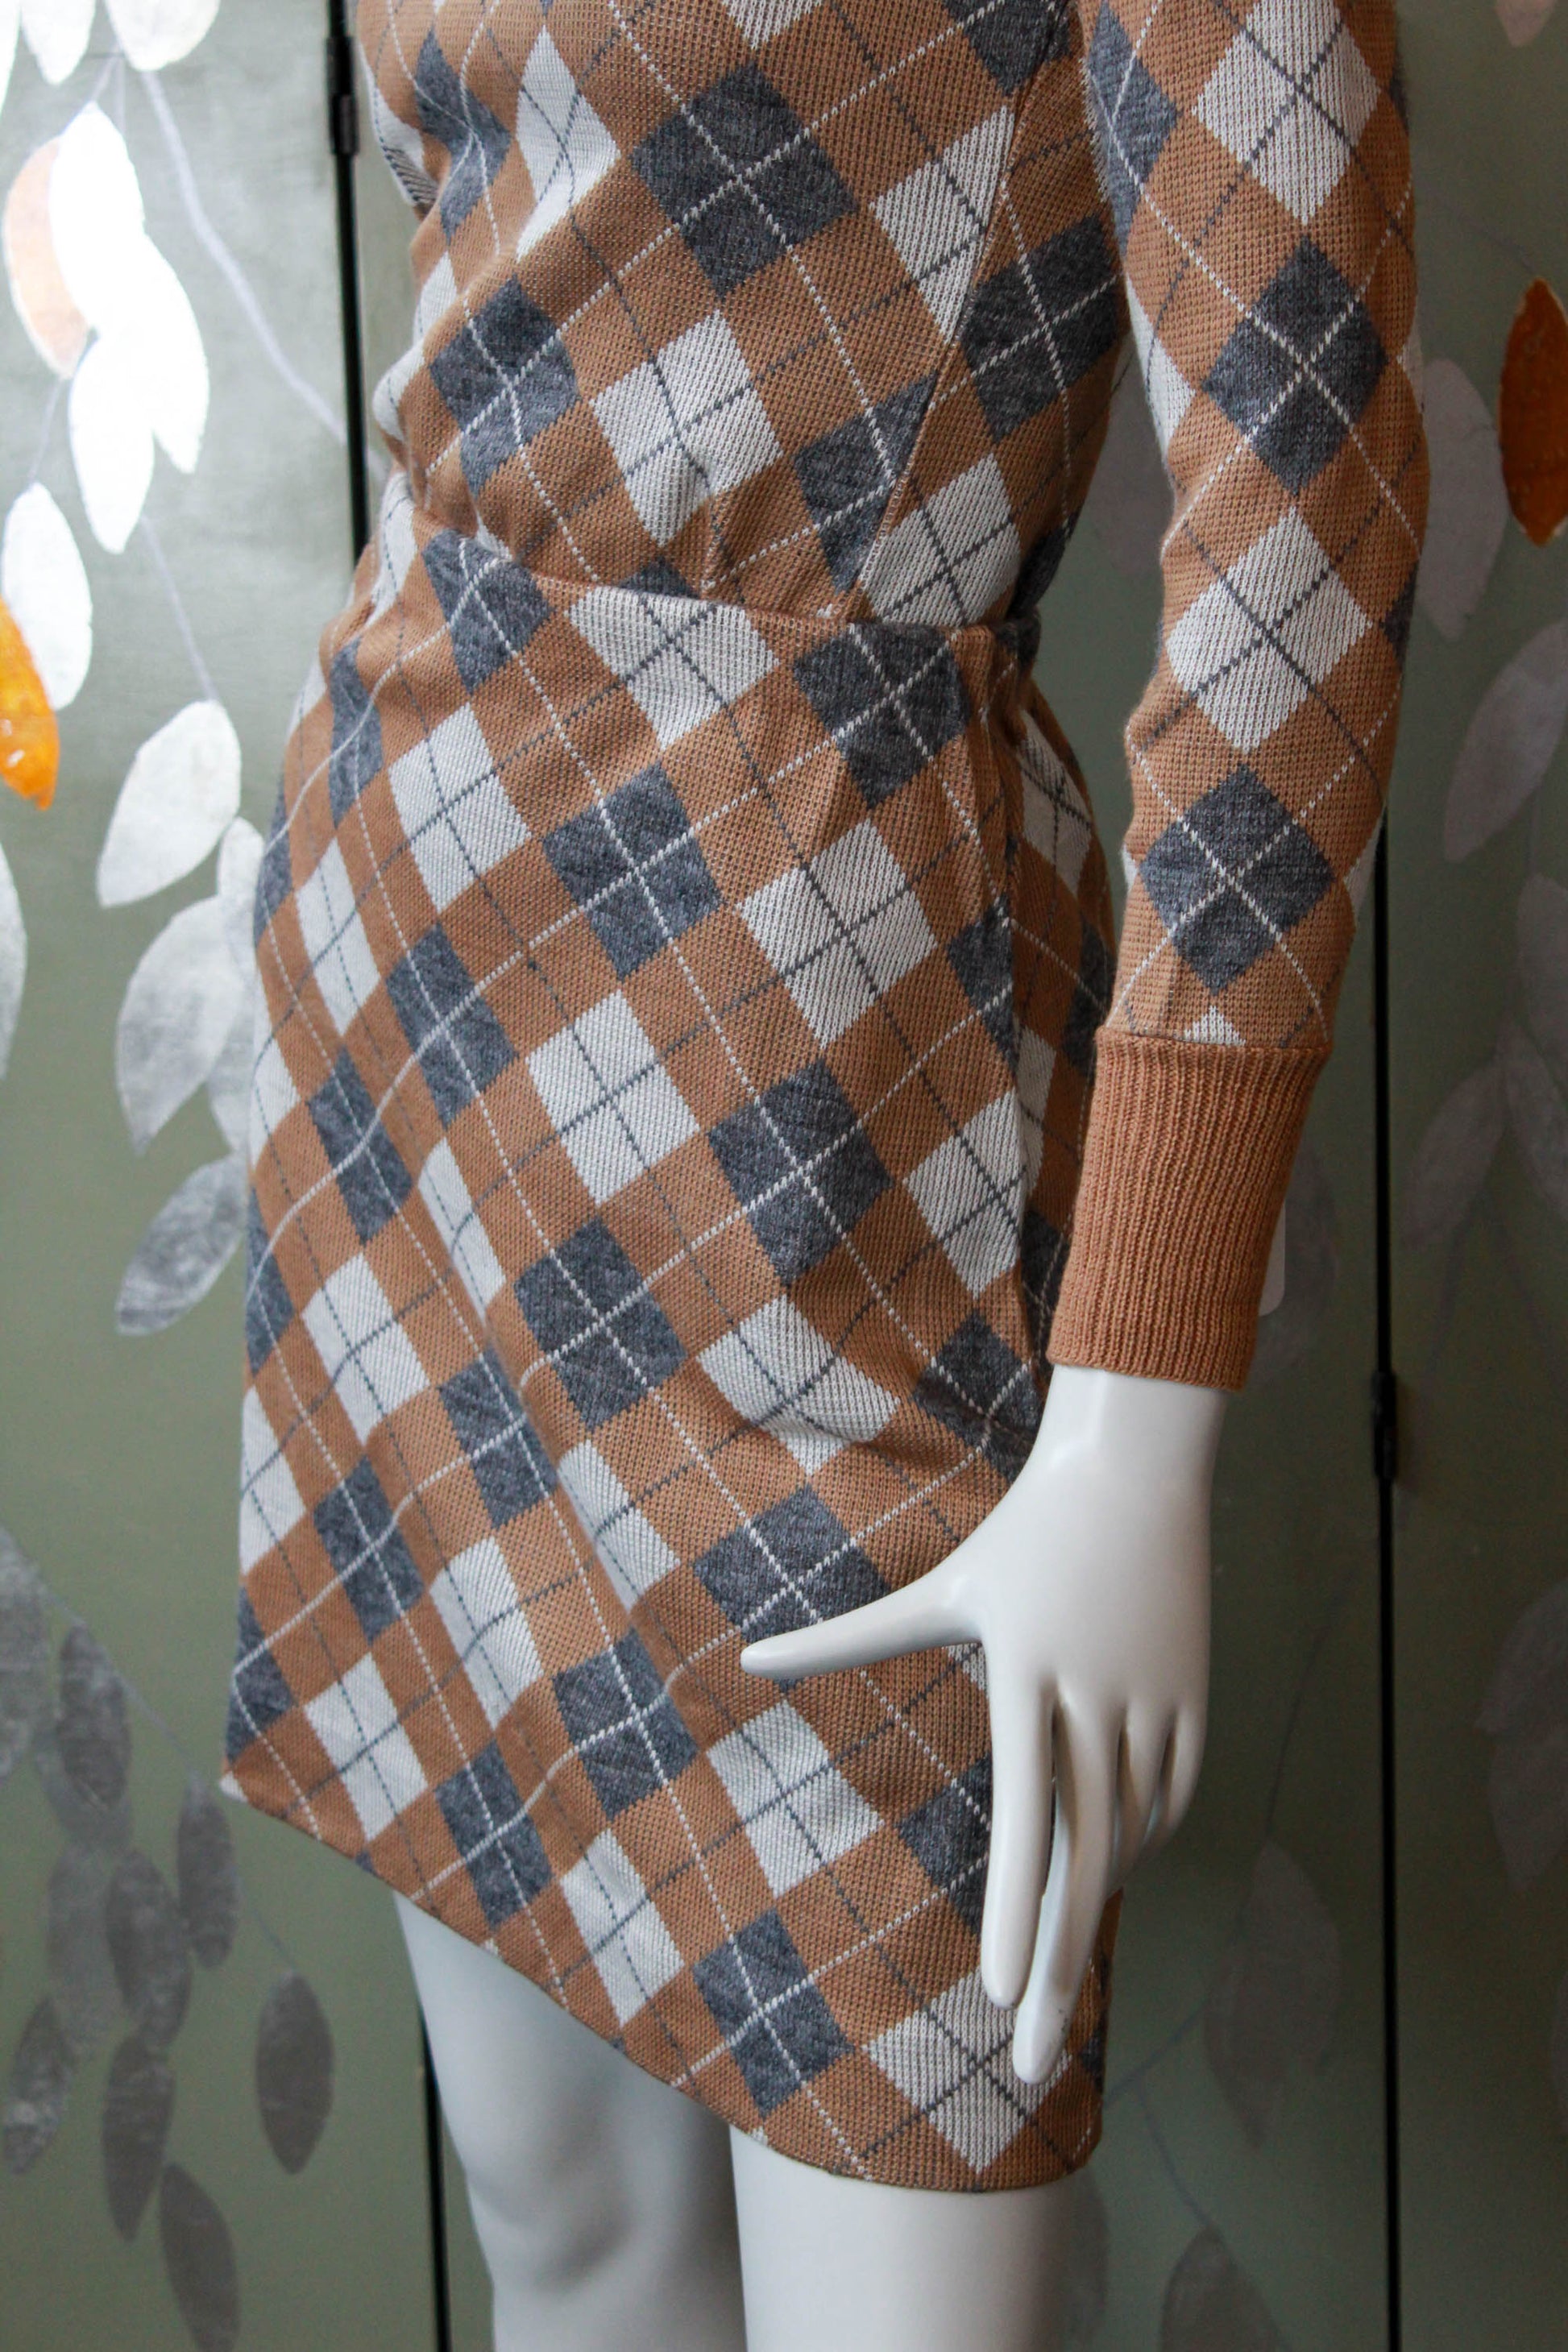 1980s deadstock argyle knit sweater and skirt matching set, cher horowitz preppy style, camel white and grey argyle plaid. mini skirt